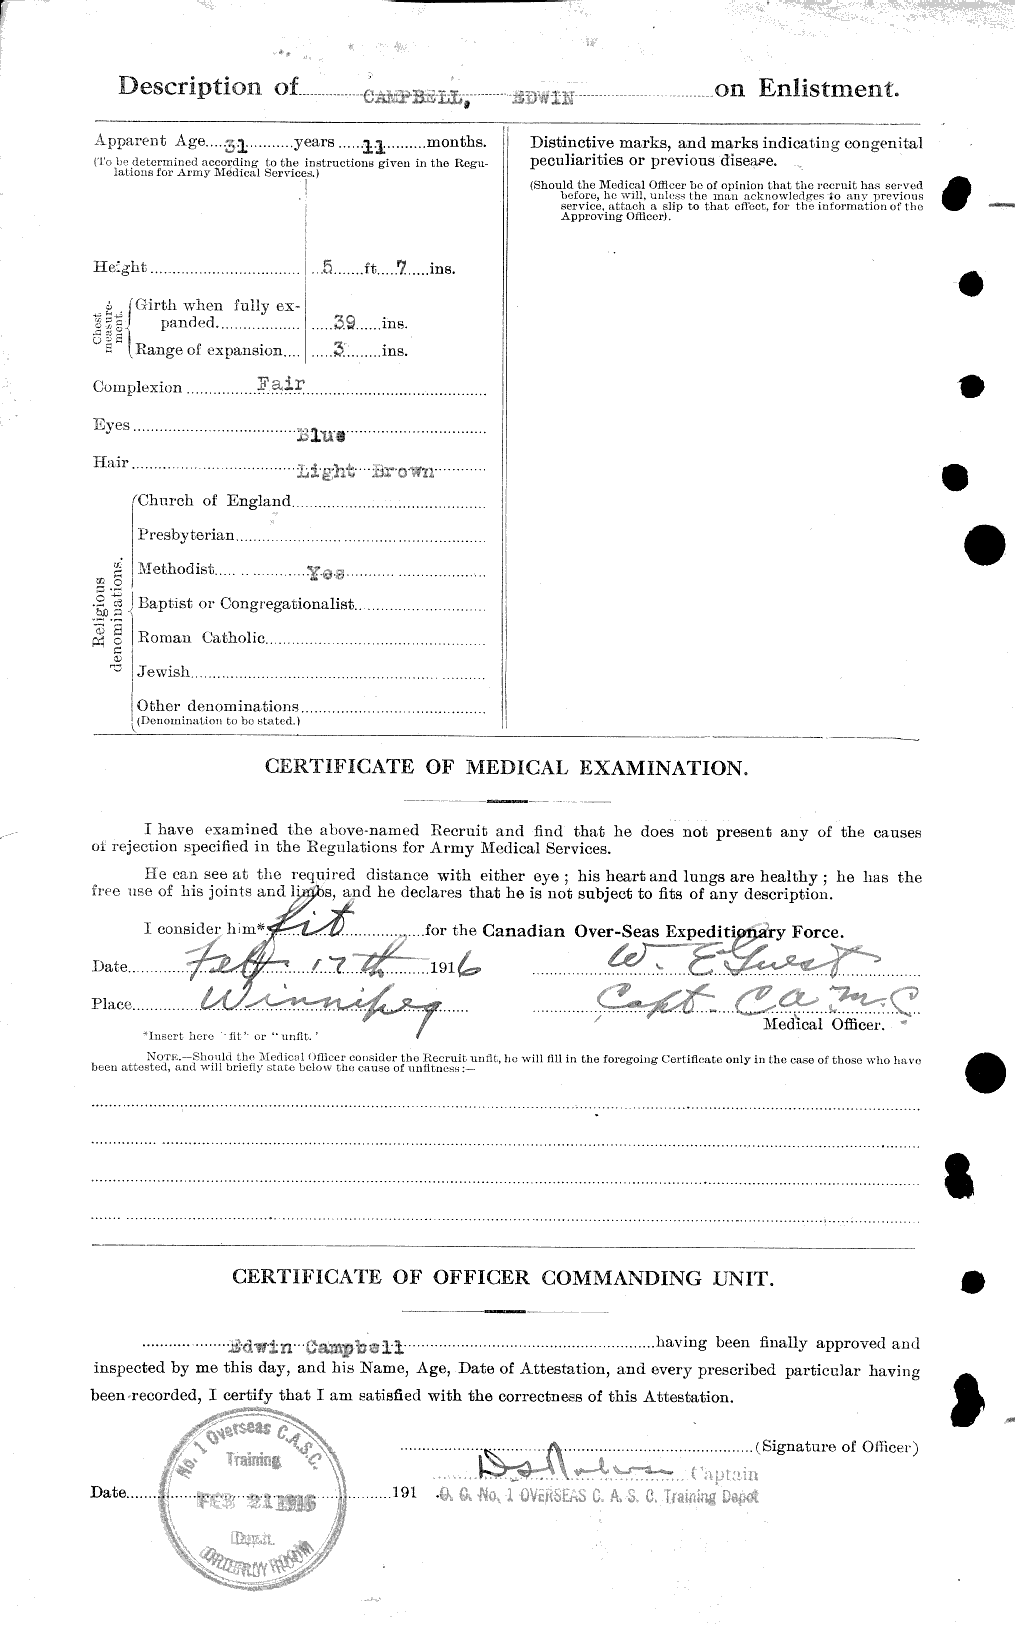 Personnel Records of the First World War - CEF 003654b